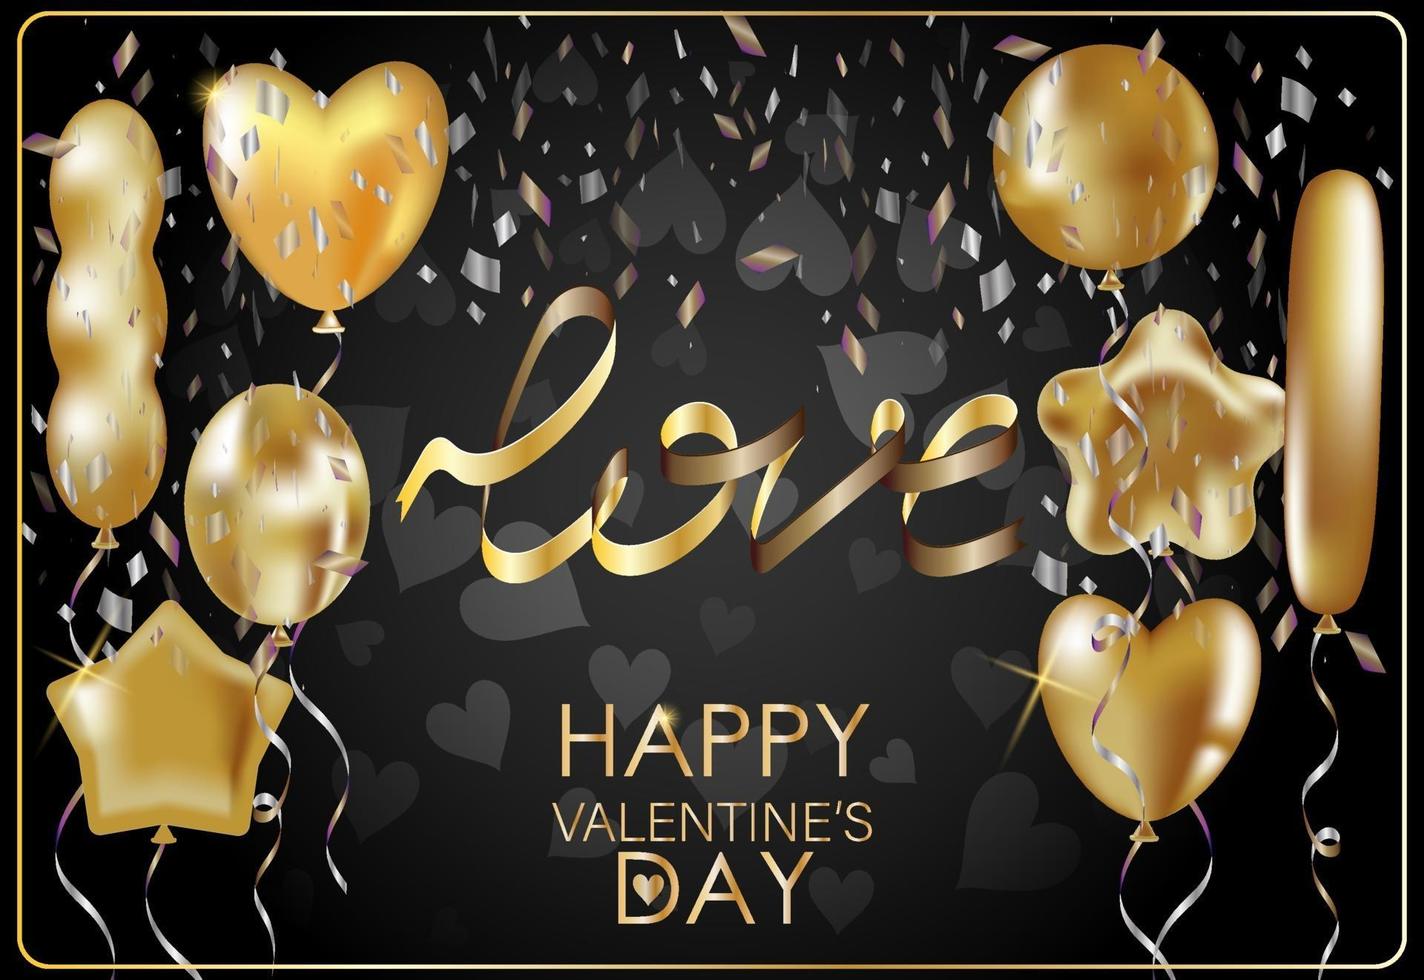 Greeting card for Valentine's Day. Golden inflatable balloons vector